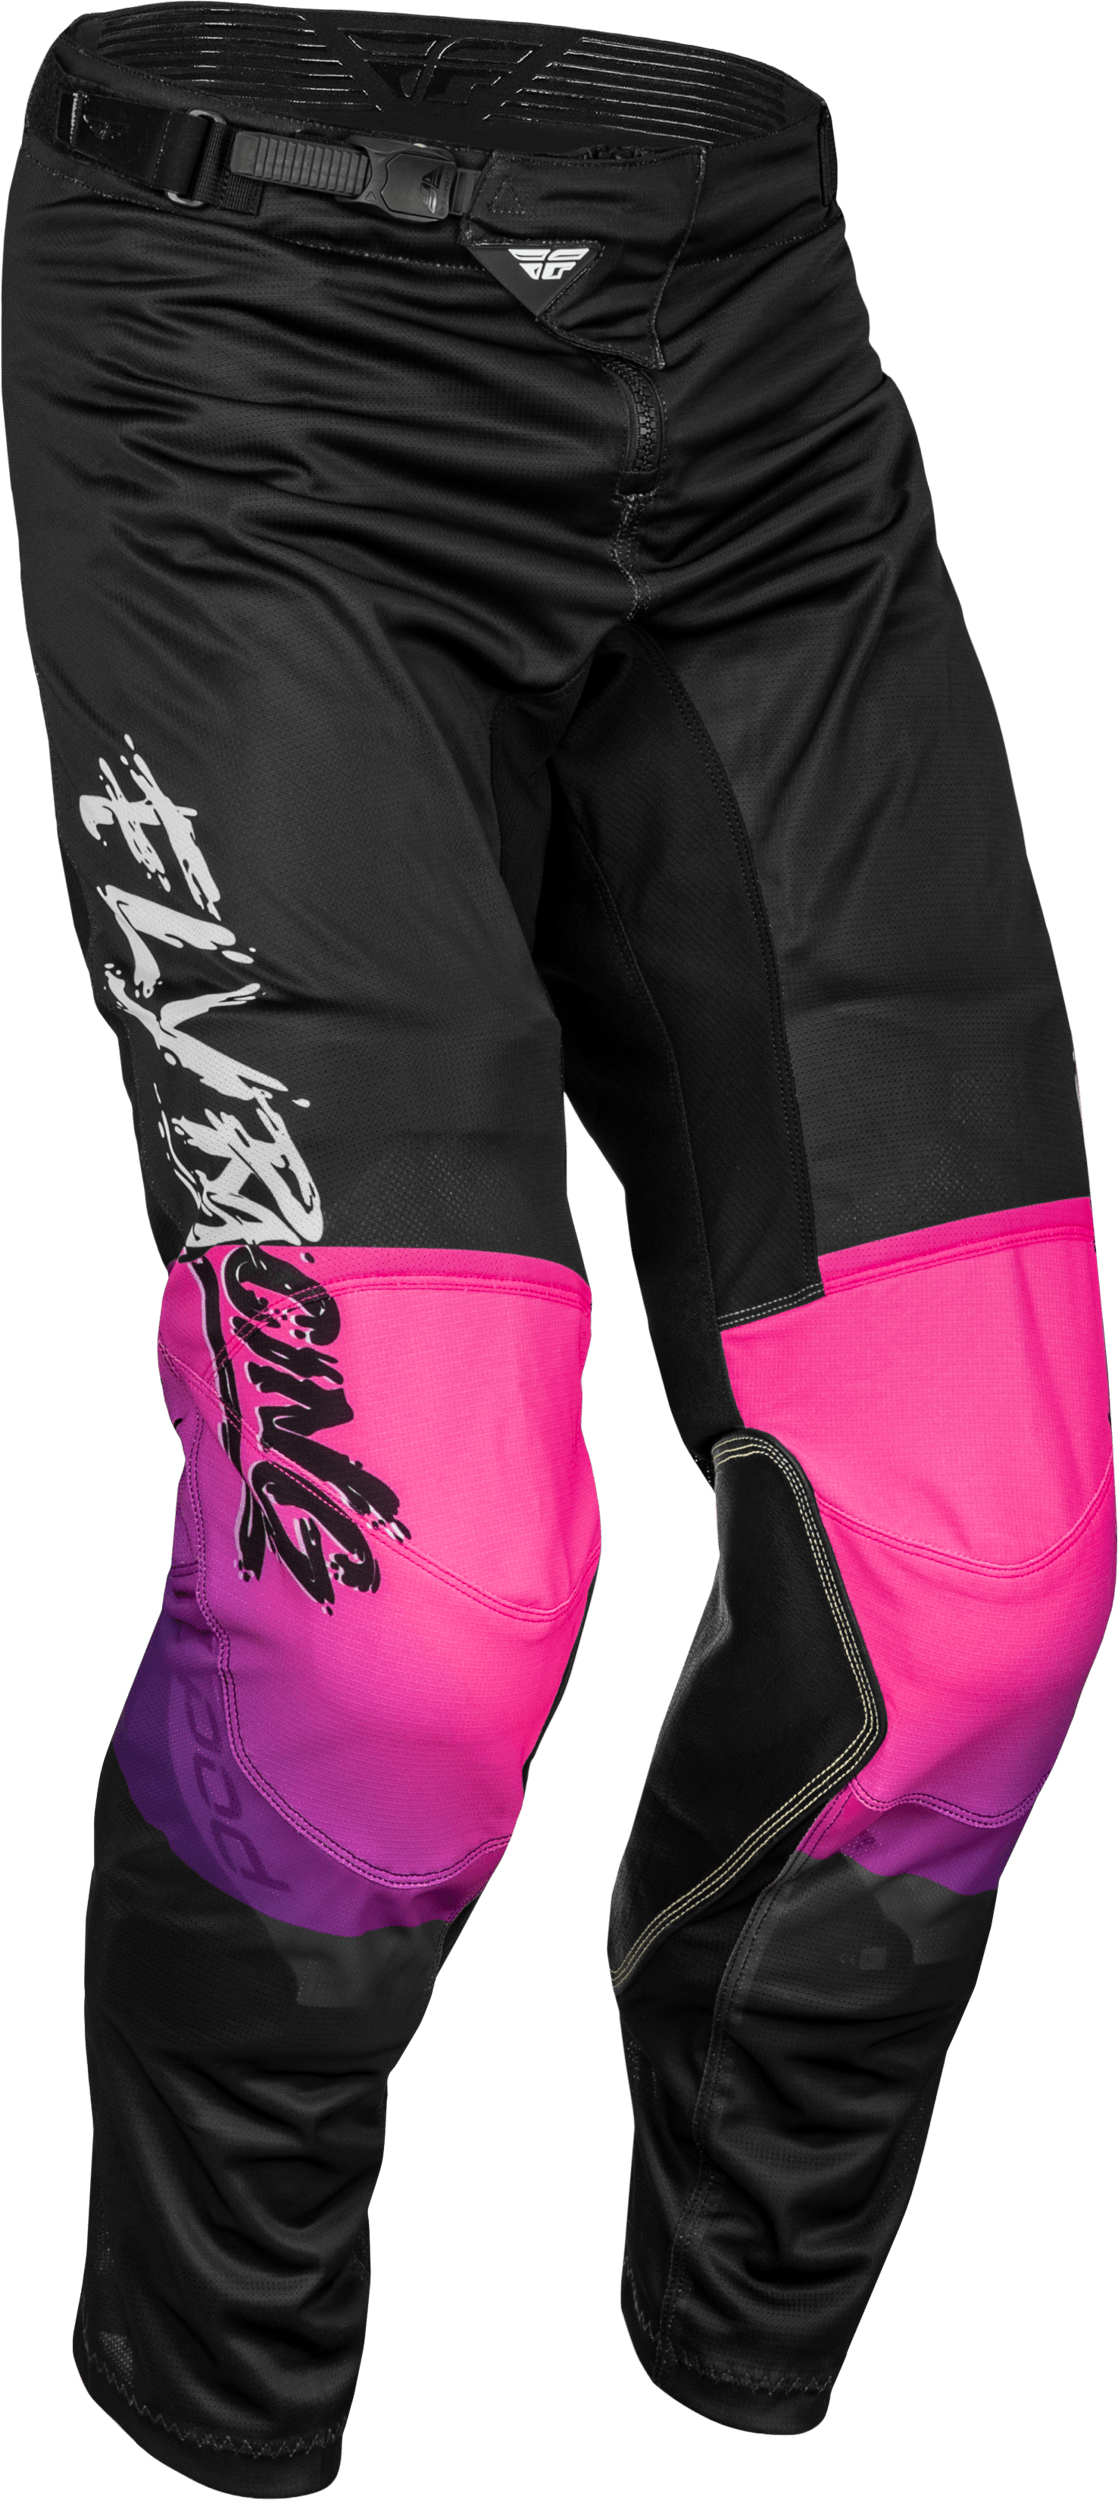 https://buywitchdoctors.com/cdn/shop/files/youth-kinetic-mesh-khaos-pants-by-fly-racing-377-34022-pants-black-purple-pink-22-377-34022-31221911453758.png?v=1707422658